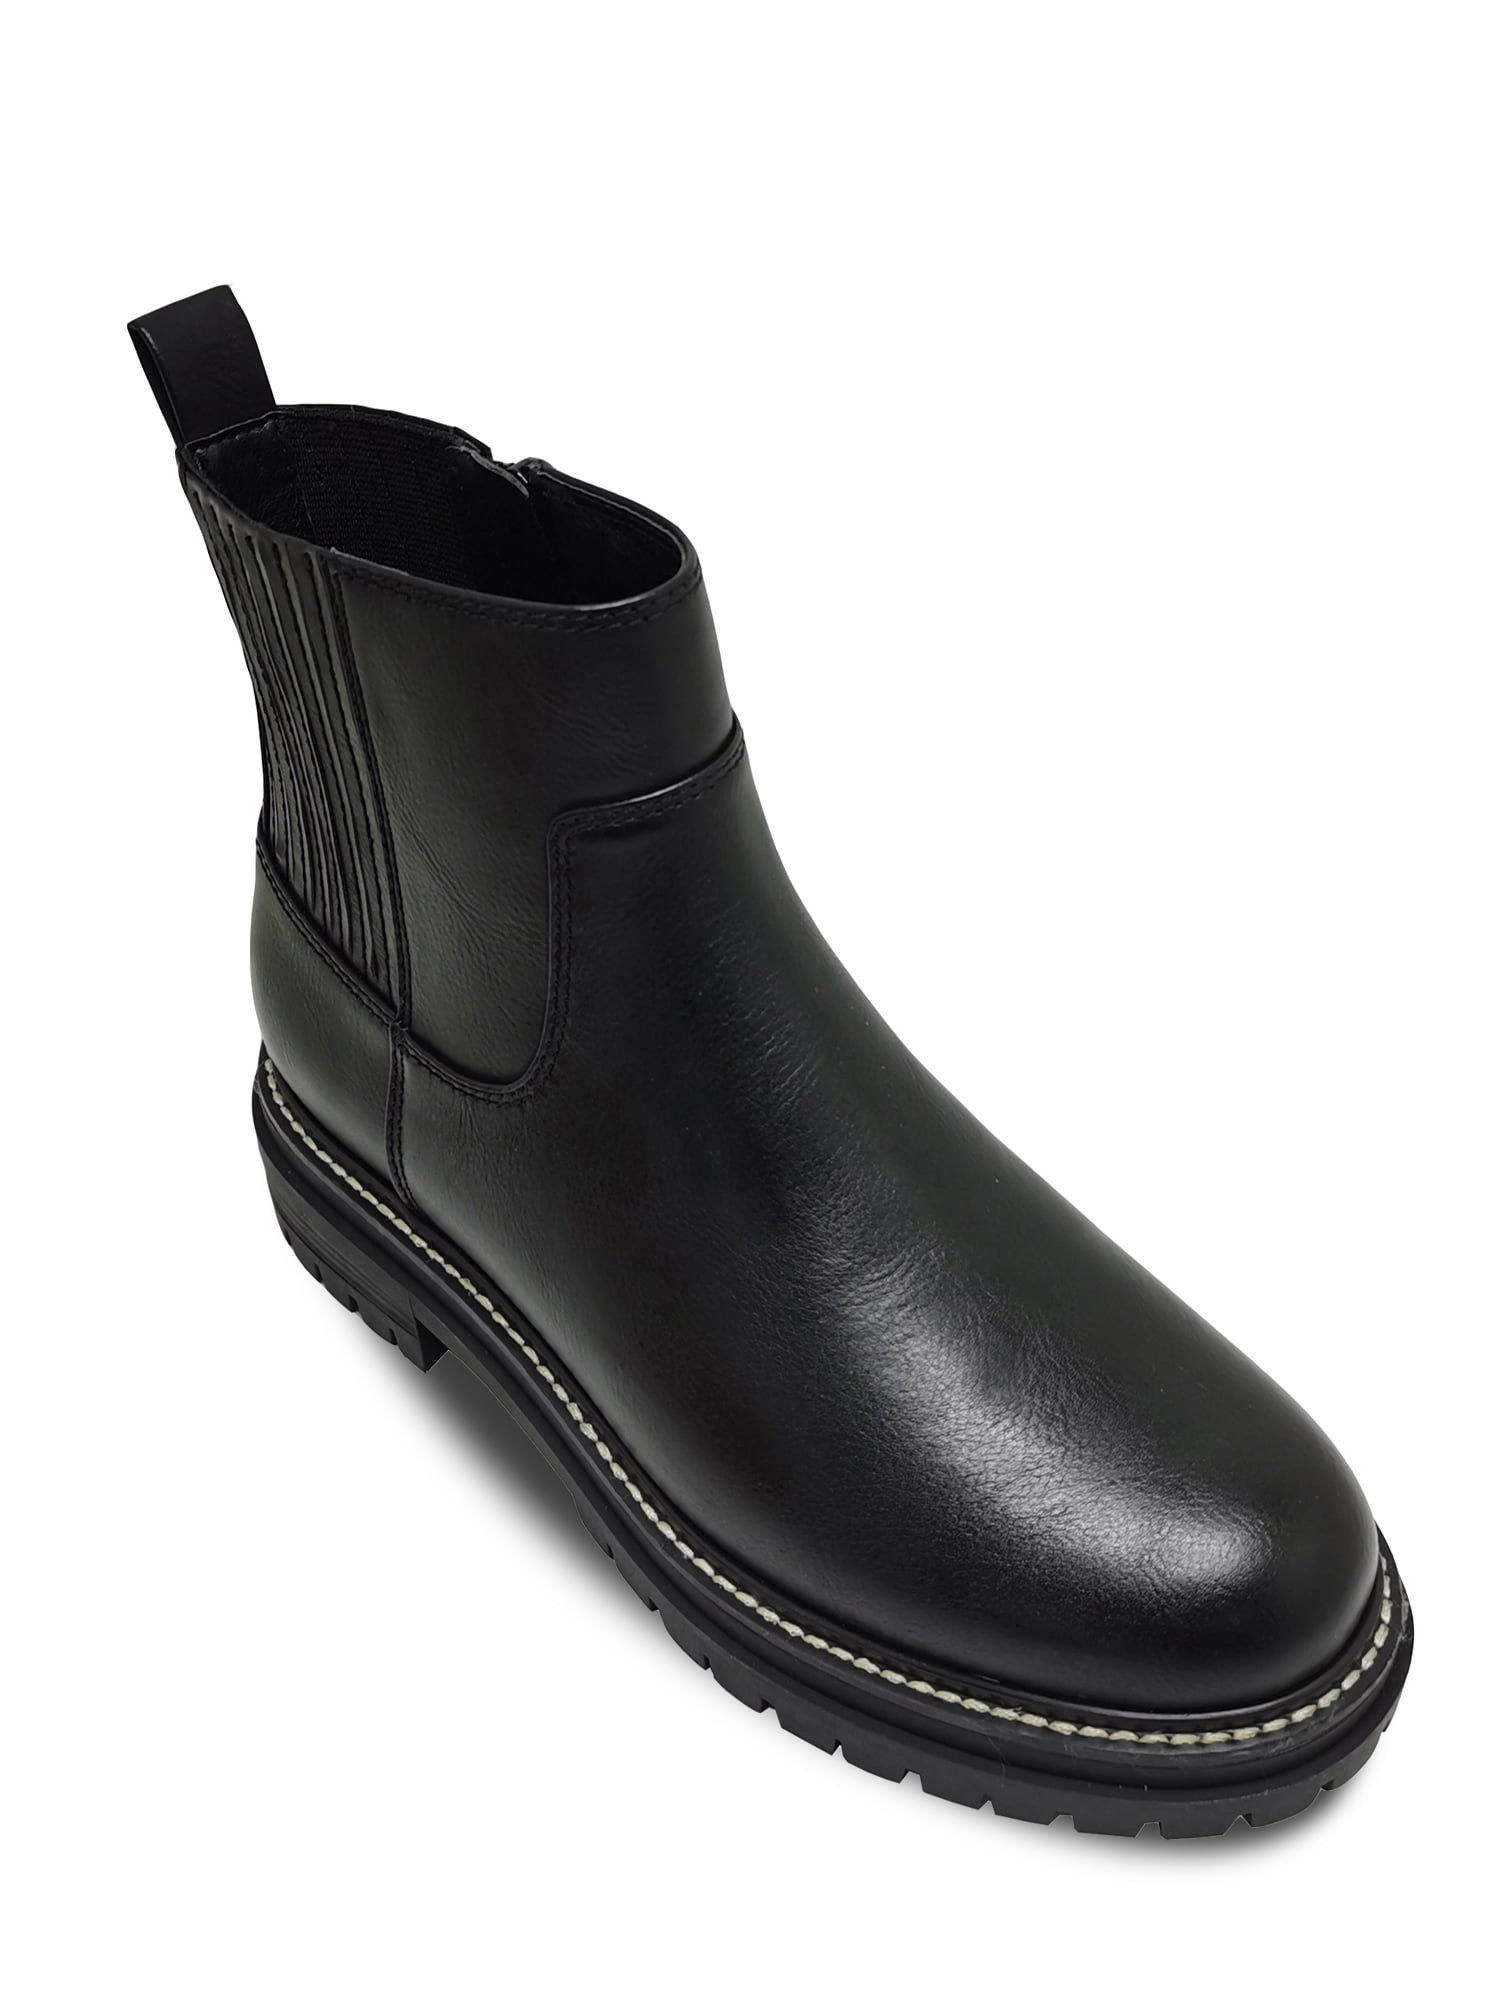 the chelsea boots in color black